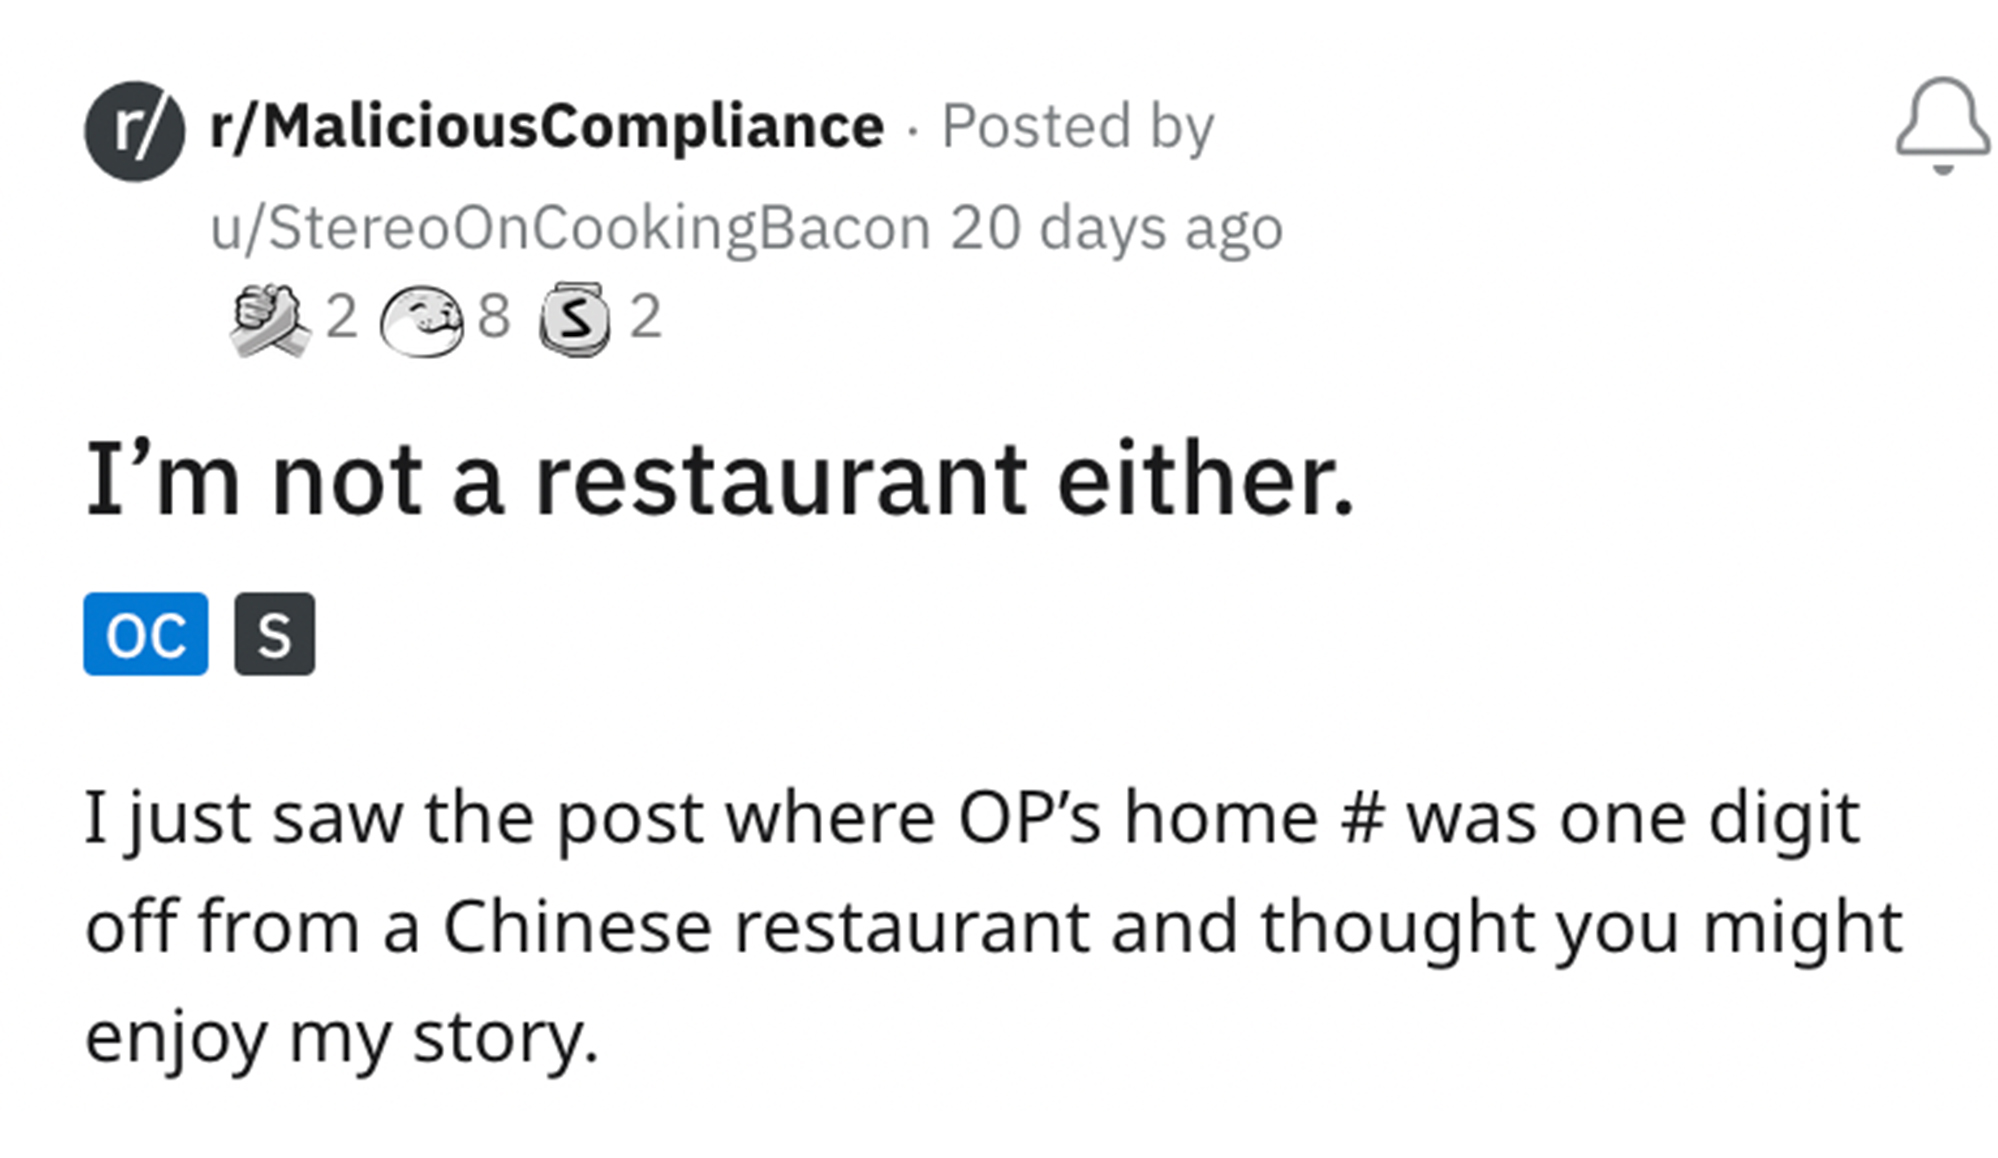 Entitled Chinese Restaurant Heckler - iphone 3g - rrMaliciousCompliance Posted by 20 days ago uStereoOnCookingBacon 28 32 I'm not a restaurant either. Oc S I just saw the post where Op's home # was one digit off from a Chinese restaurant and thought you m